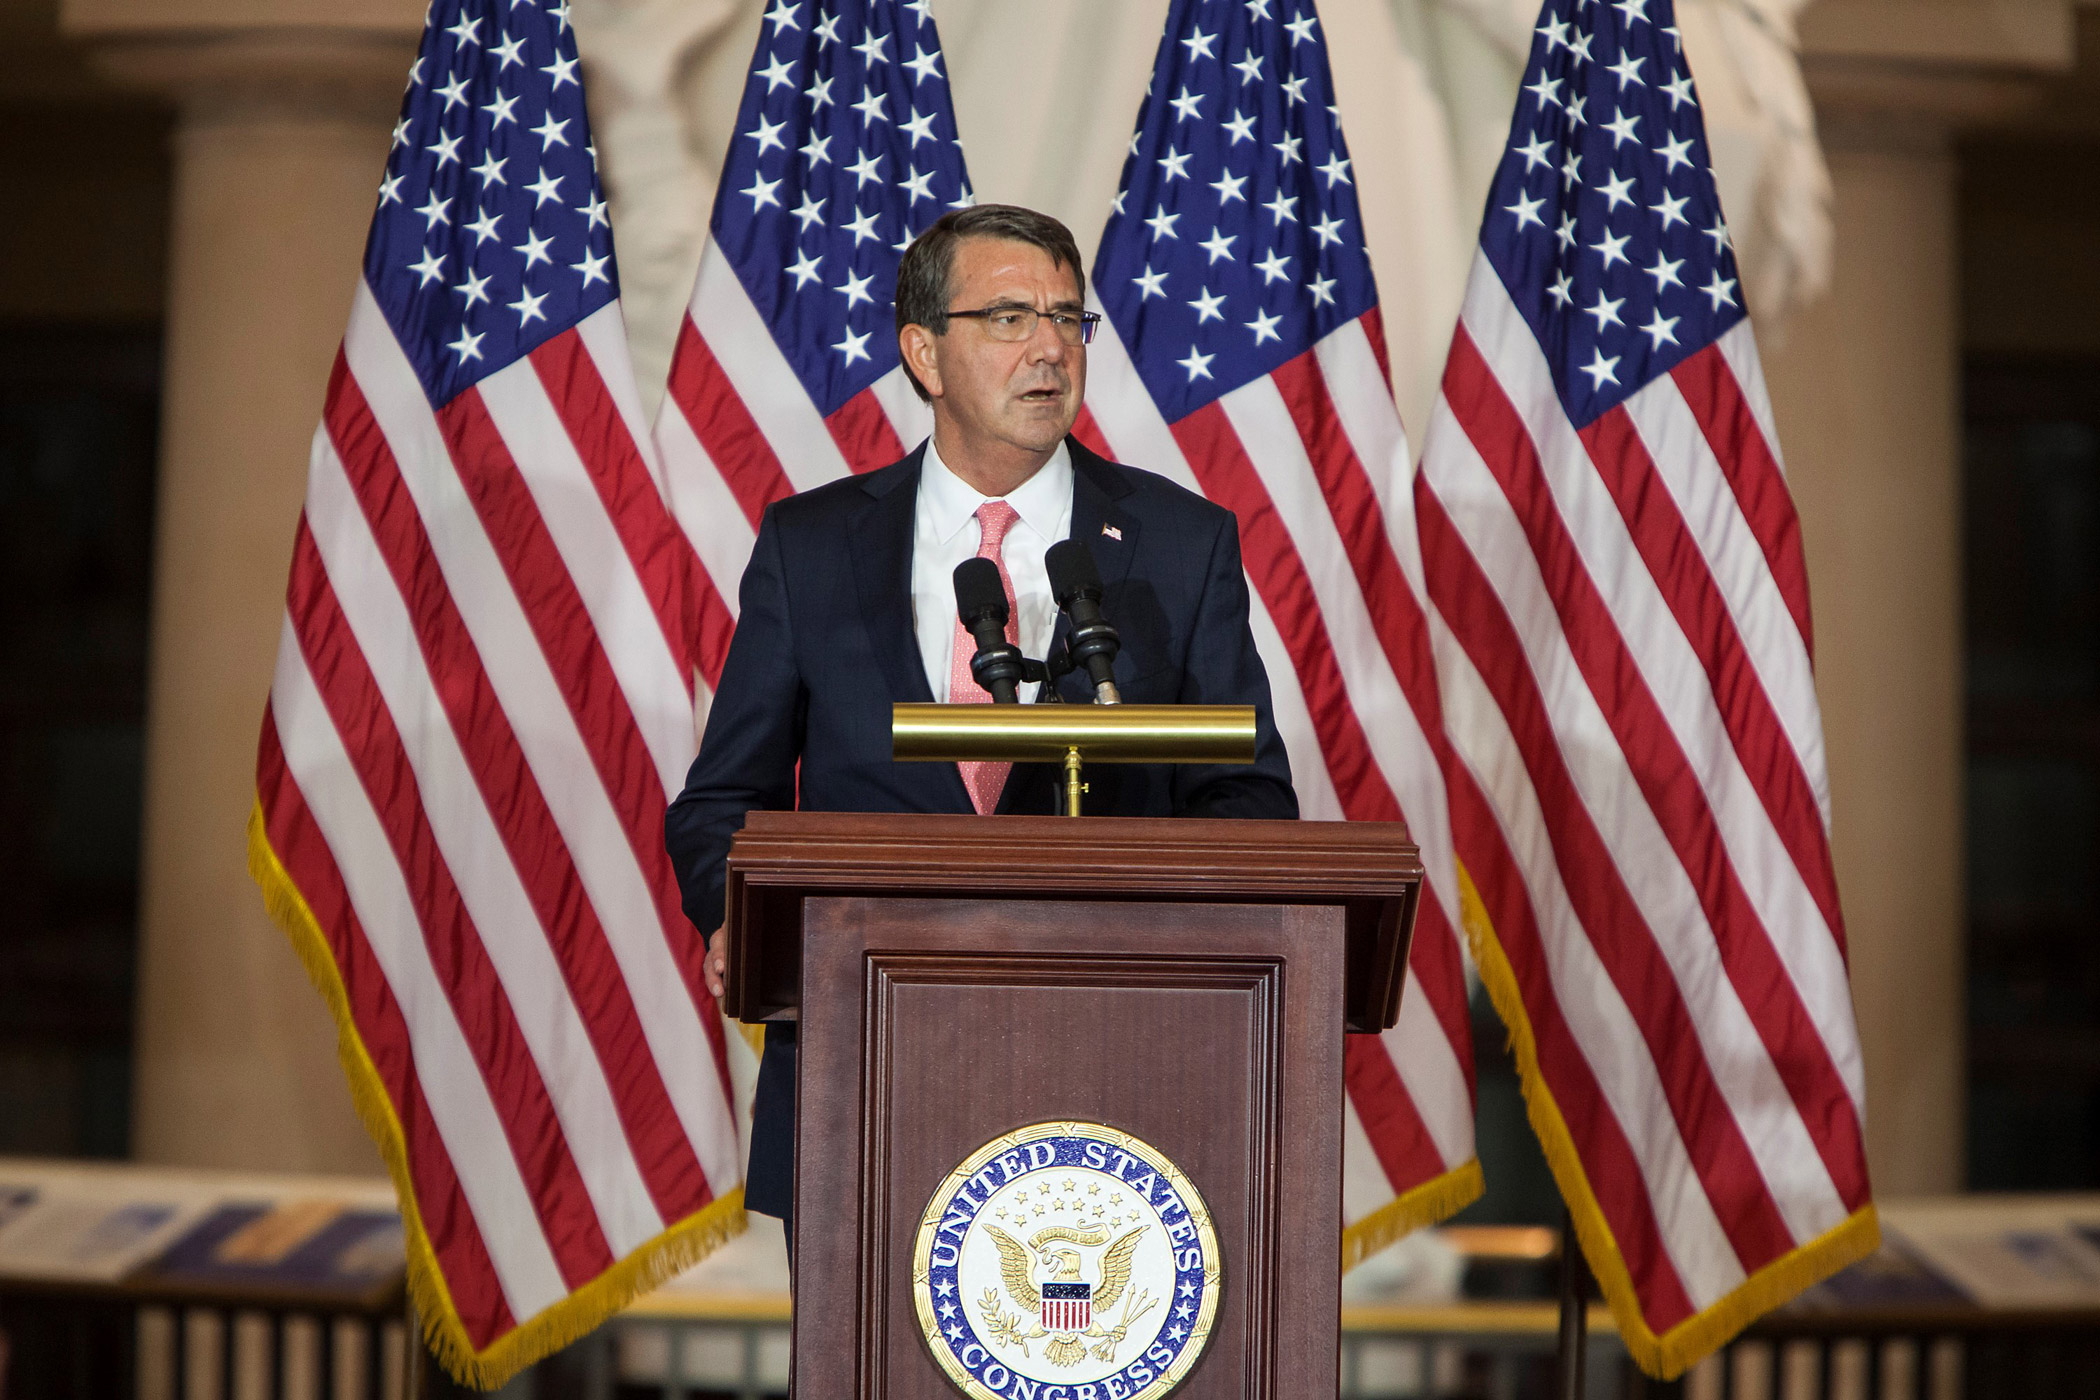 Secretary of Defense Ash Carter speaks to veterans during the Vietnam War Commemoration ceremony at the Capitol in Washington, DC on July 8, 2015. (Samuel Corum—Anadolu Agency/Getty Images)